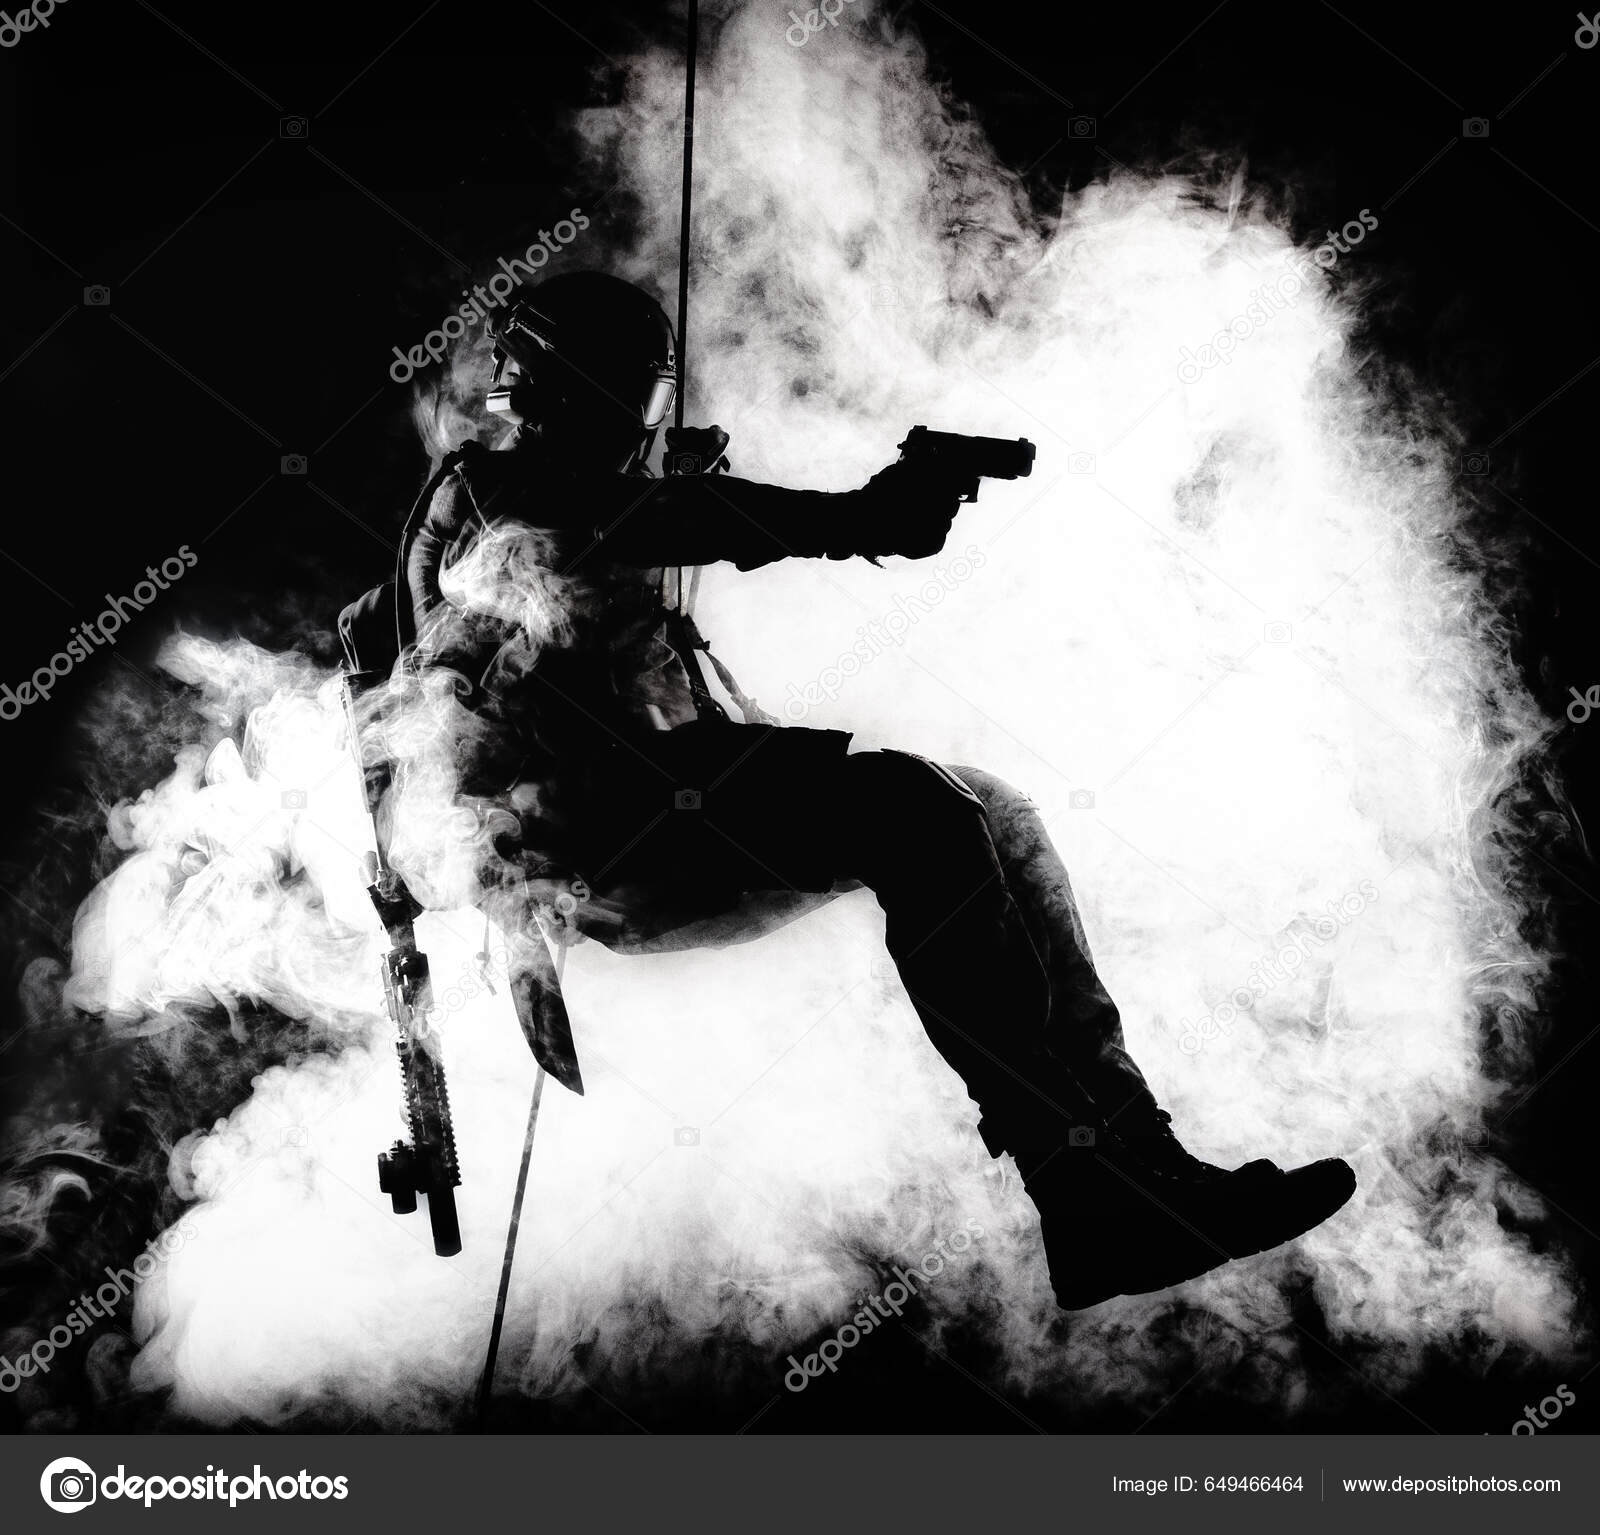 Silhouette Police Officer Tactical Gear Descending Height Rope Exercises  Weapons Stock Photo by ©zabelin 649466464